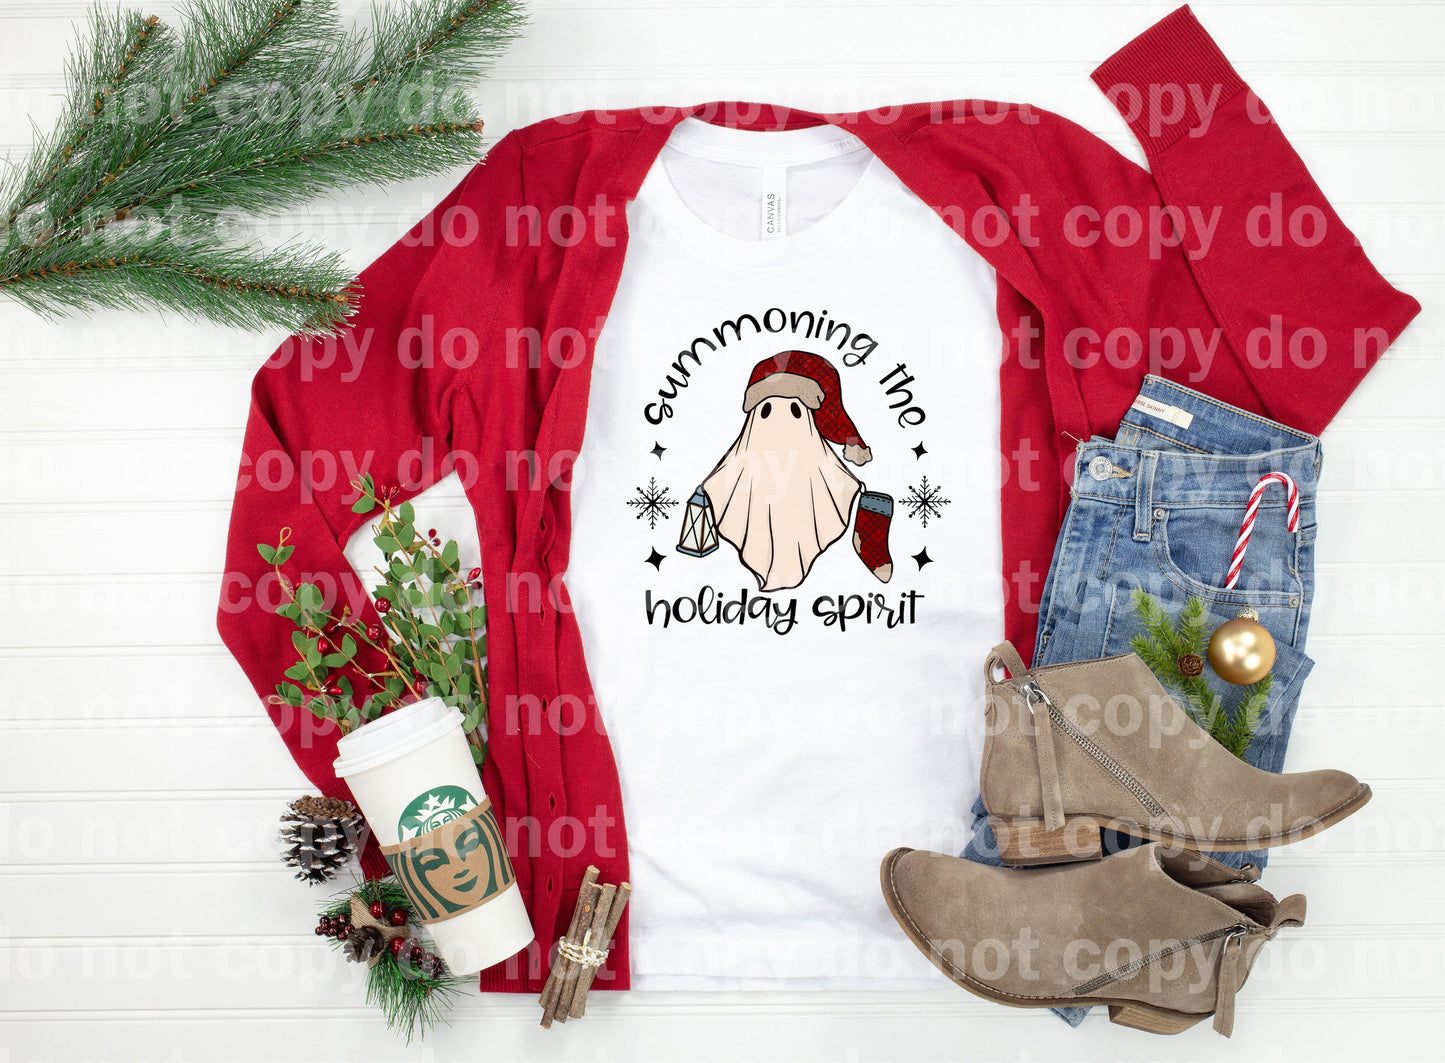 Summoning The Holiday Spirit Dream Print or Sublimation Print